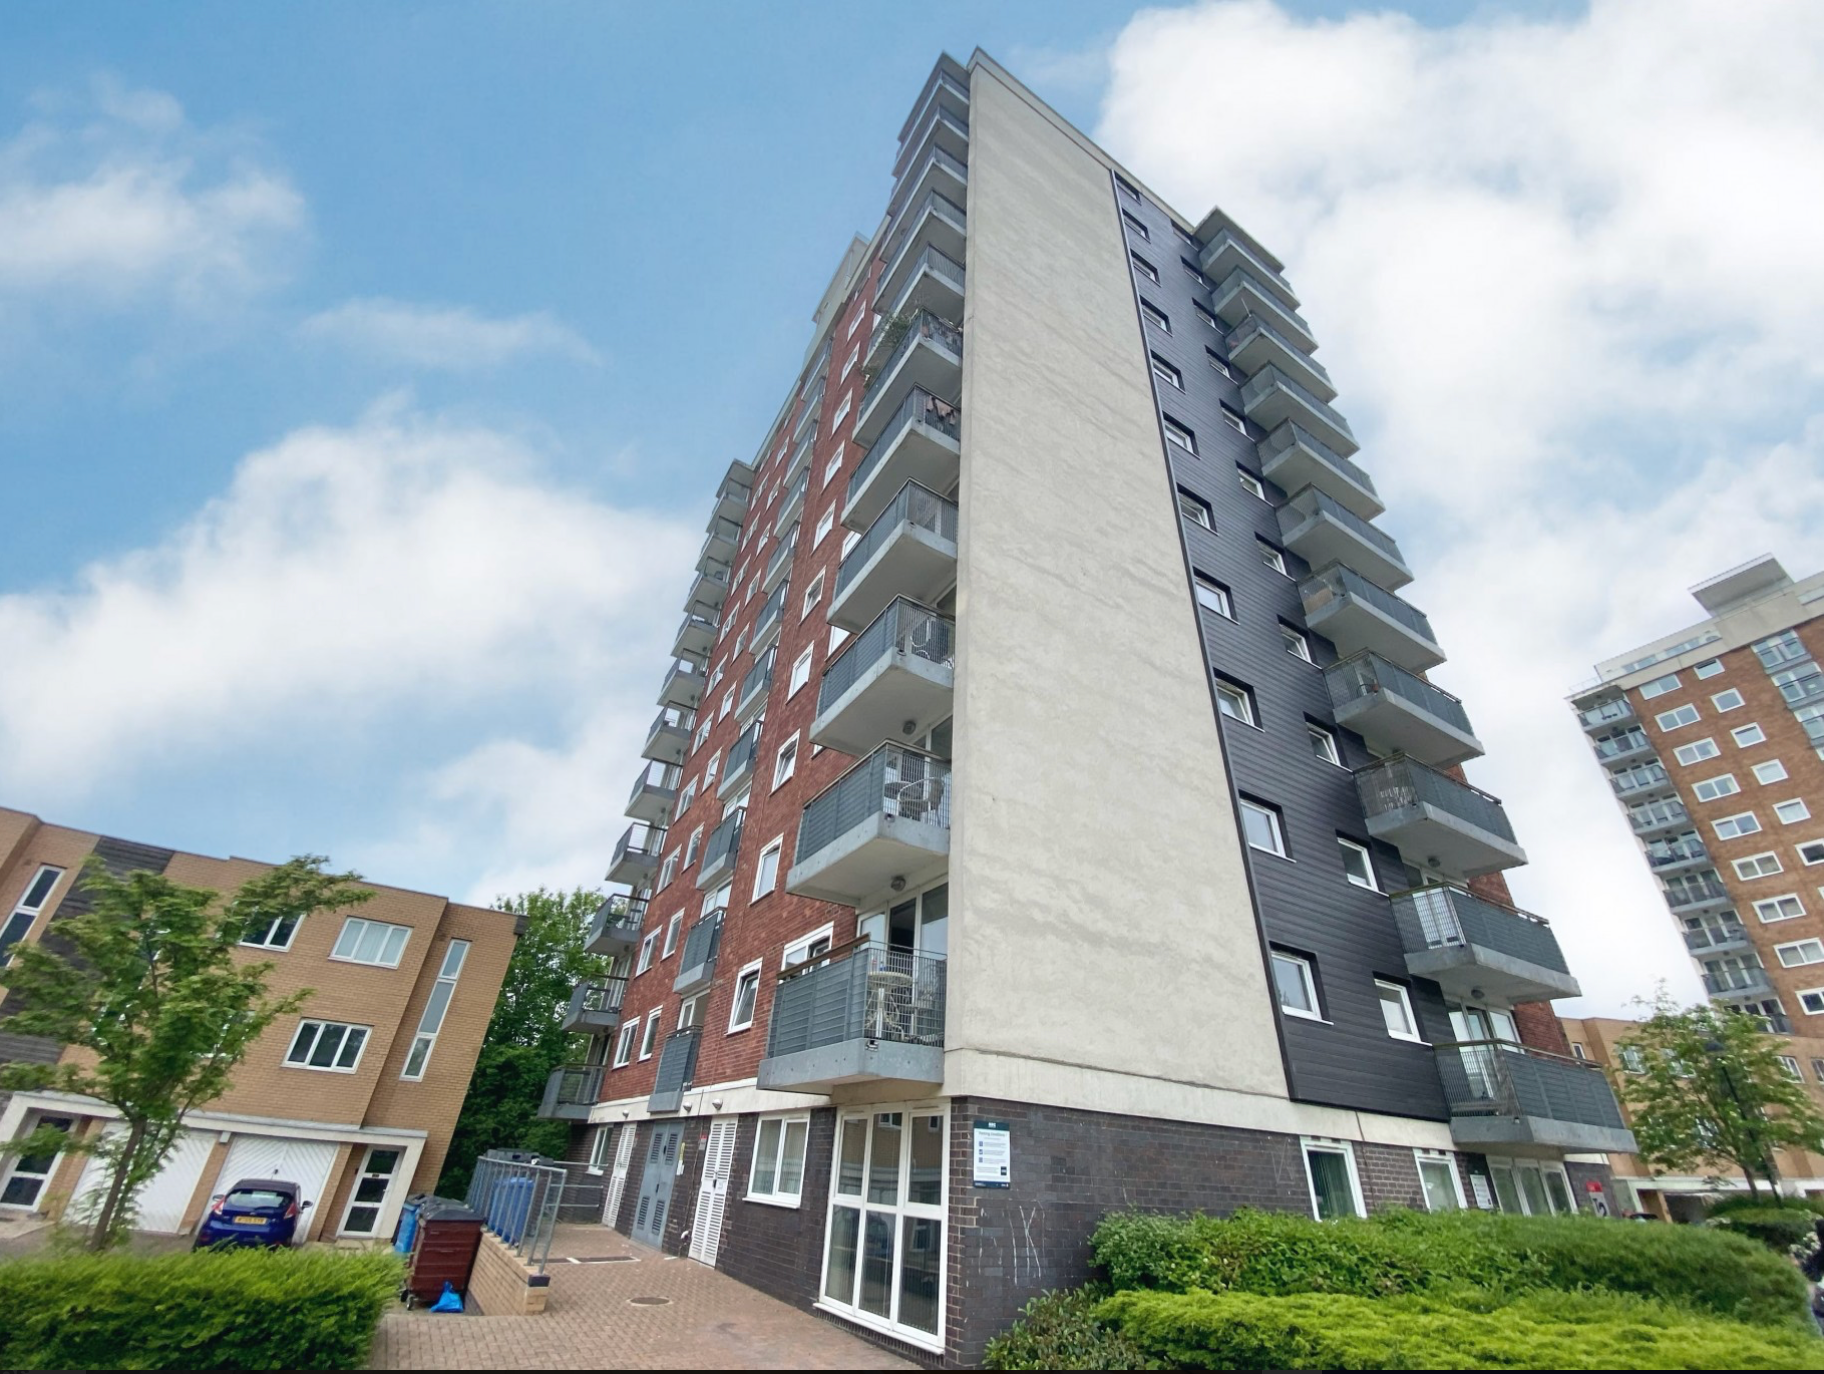 Apartment 51, 22 Lakeside Rise, Manchester, Manchester, M9 8QE